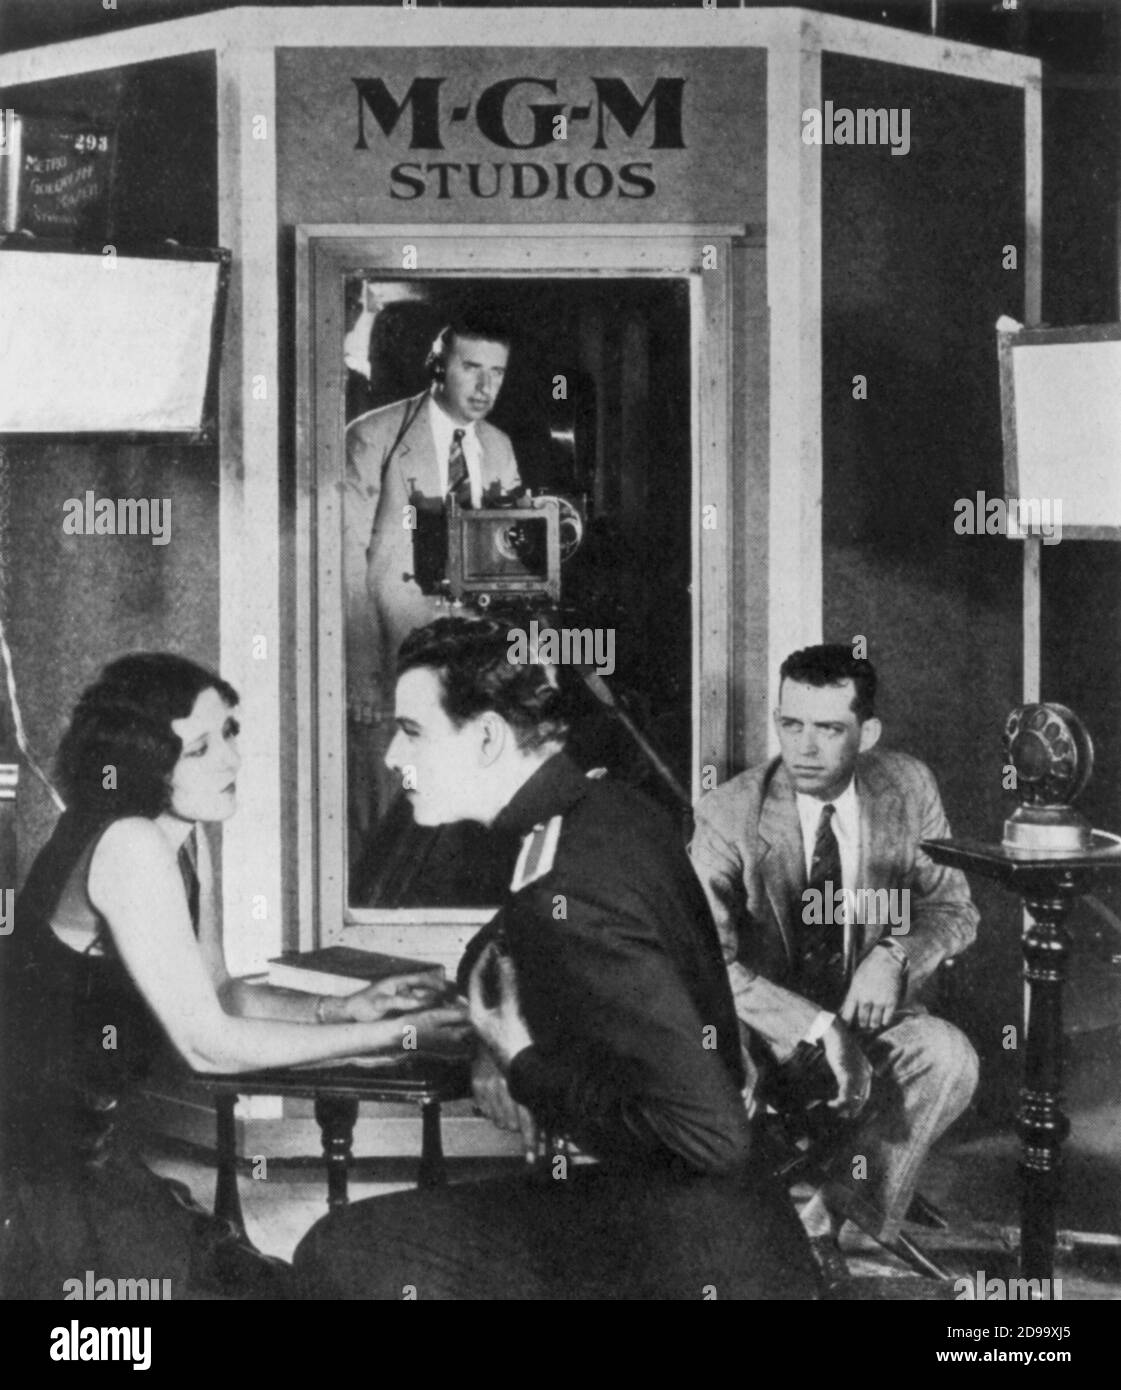 1930 , USA  : Nils Aster ( 1897 - 1981 ) and Raquel Torres at MGM Studios during a early recording sound for a talkies movie . The microphone was beside the actors, over the glass  window stand the cameraman John Arnold for eliminate all sounds of camera - CINEMA SONORO - SILENT MOVIE to TALK - Metro Goldwyn Mayer - MGM - M.G.M. - MUTO - TALKIES  - MICROFONO - SET - CINEMA - FILM -----  Archivio GBB Stock Photo